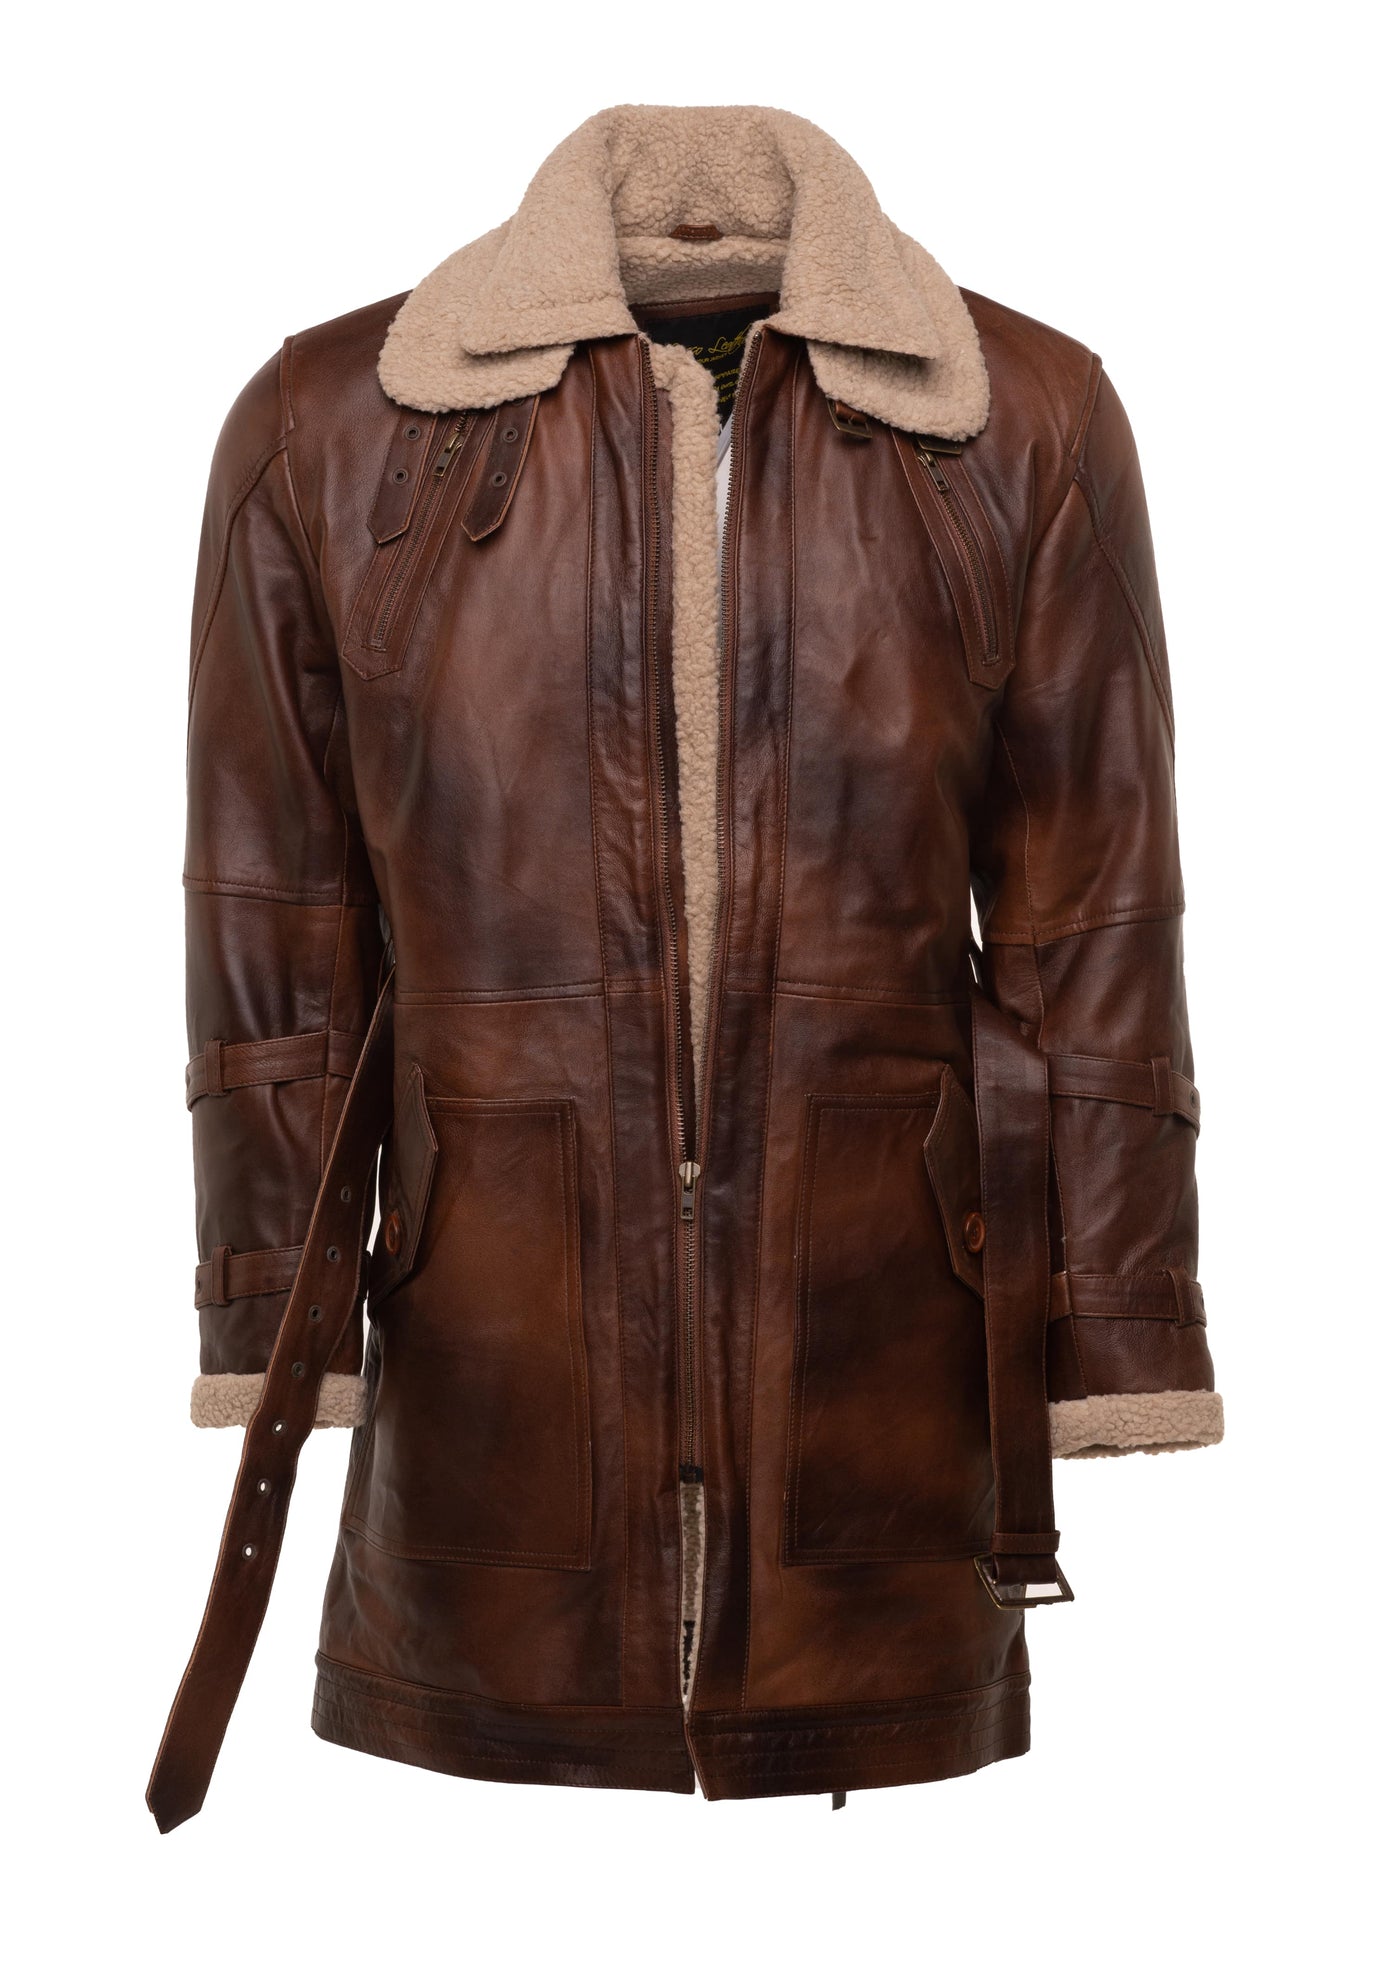 3/4 leather trench with sherpa lining coat